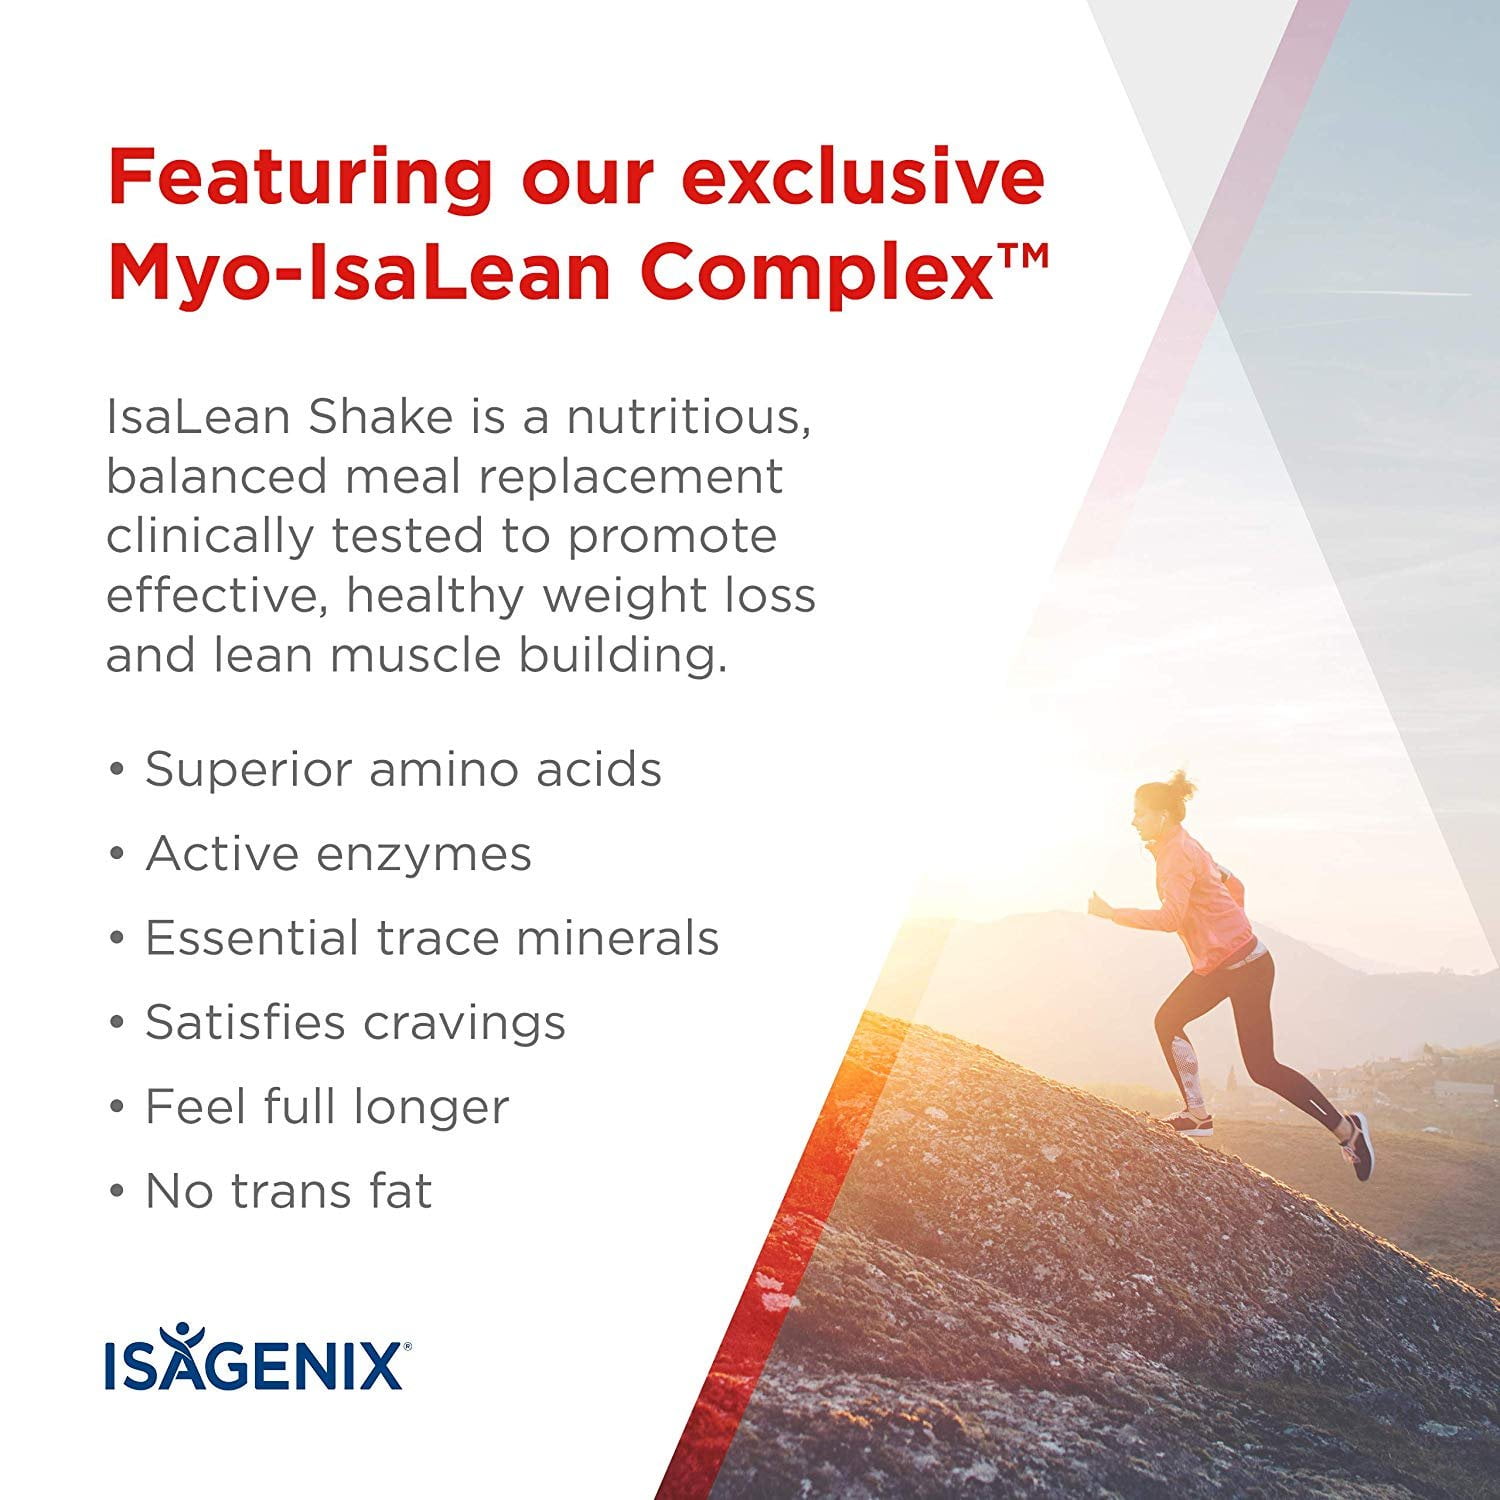 Isagenix IsaLean Shake - Complete Superfood Meal Replacement Drink Mix for  Maintaining Healthy Weight and Lean Muscle Growth - 826 Grams - 14 Meal  Canister (Strawberry Cream Flavor)